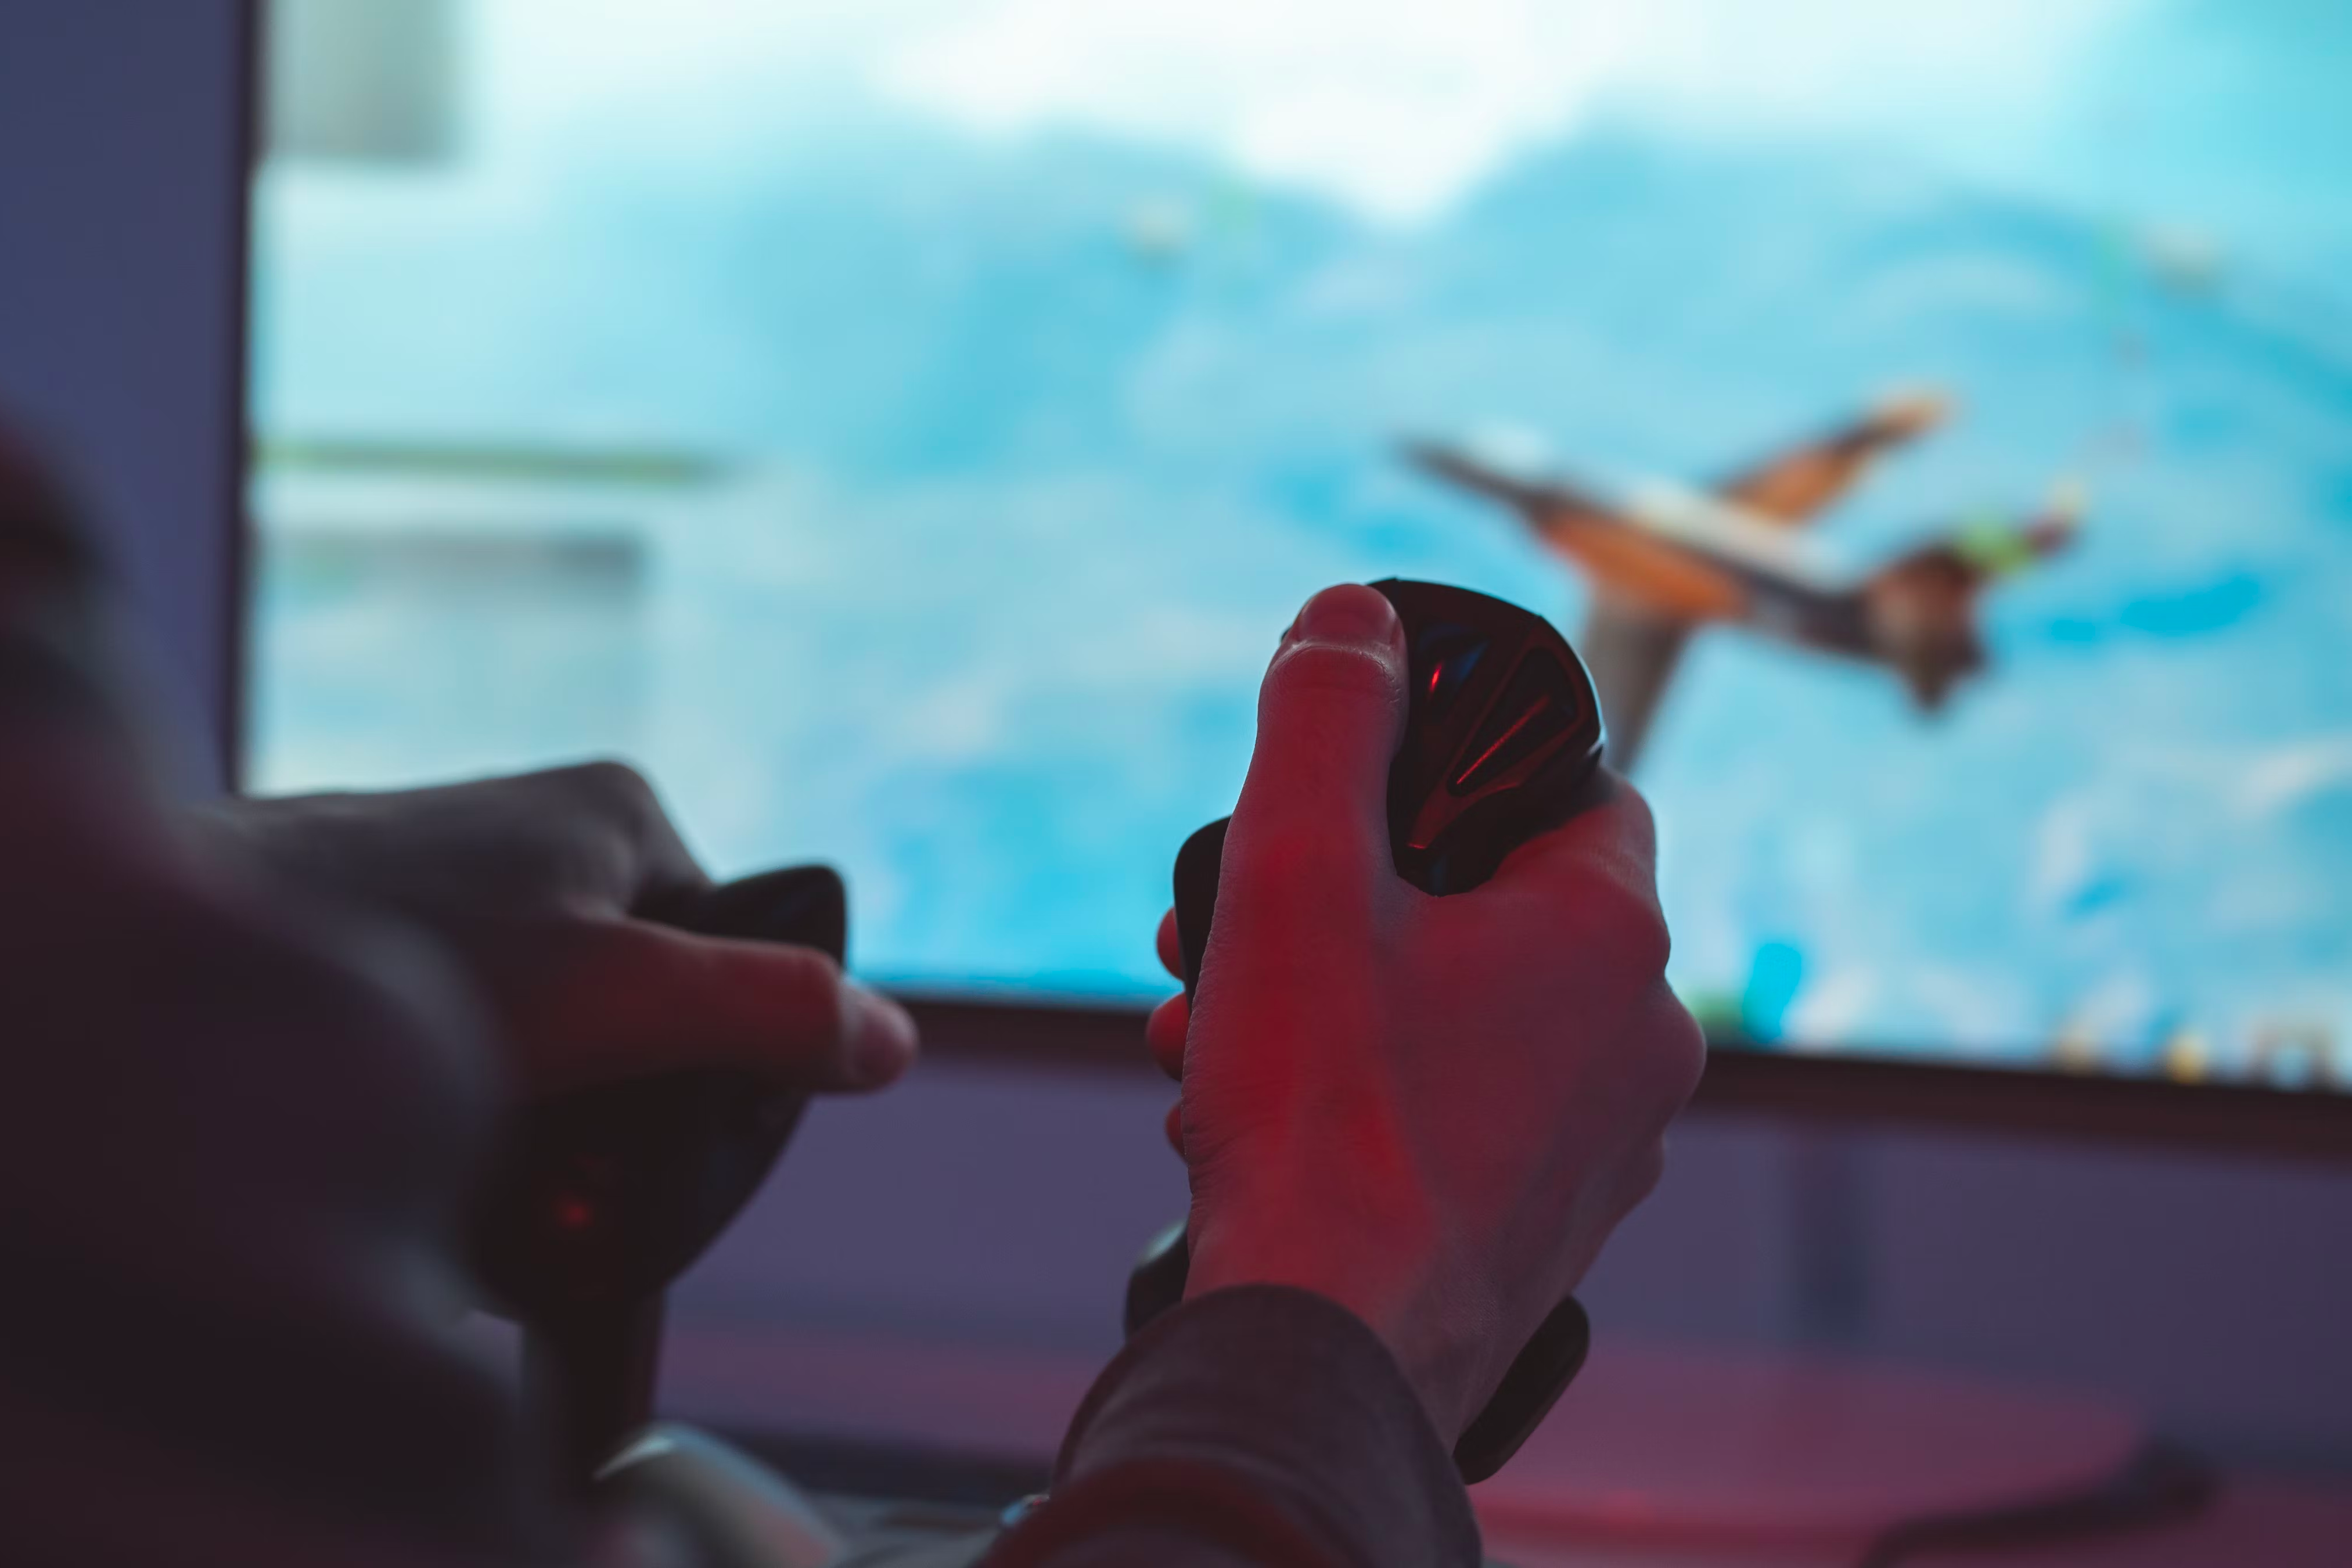 A person playing an aviation game